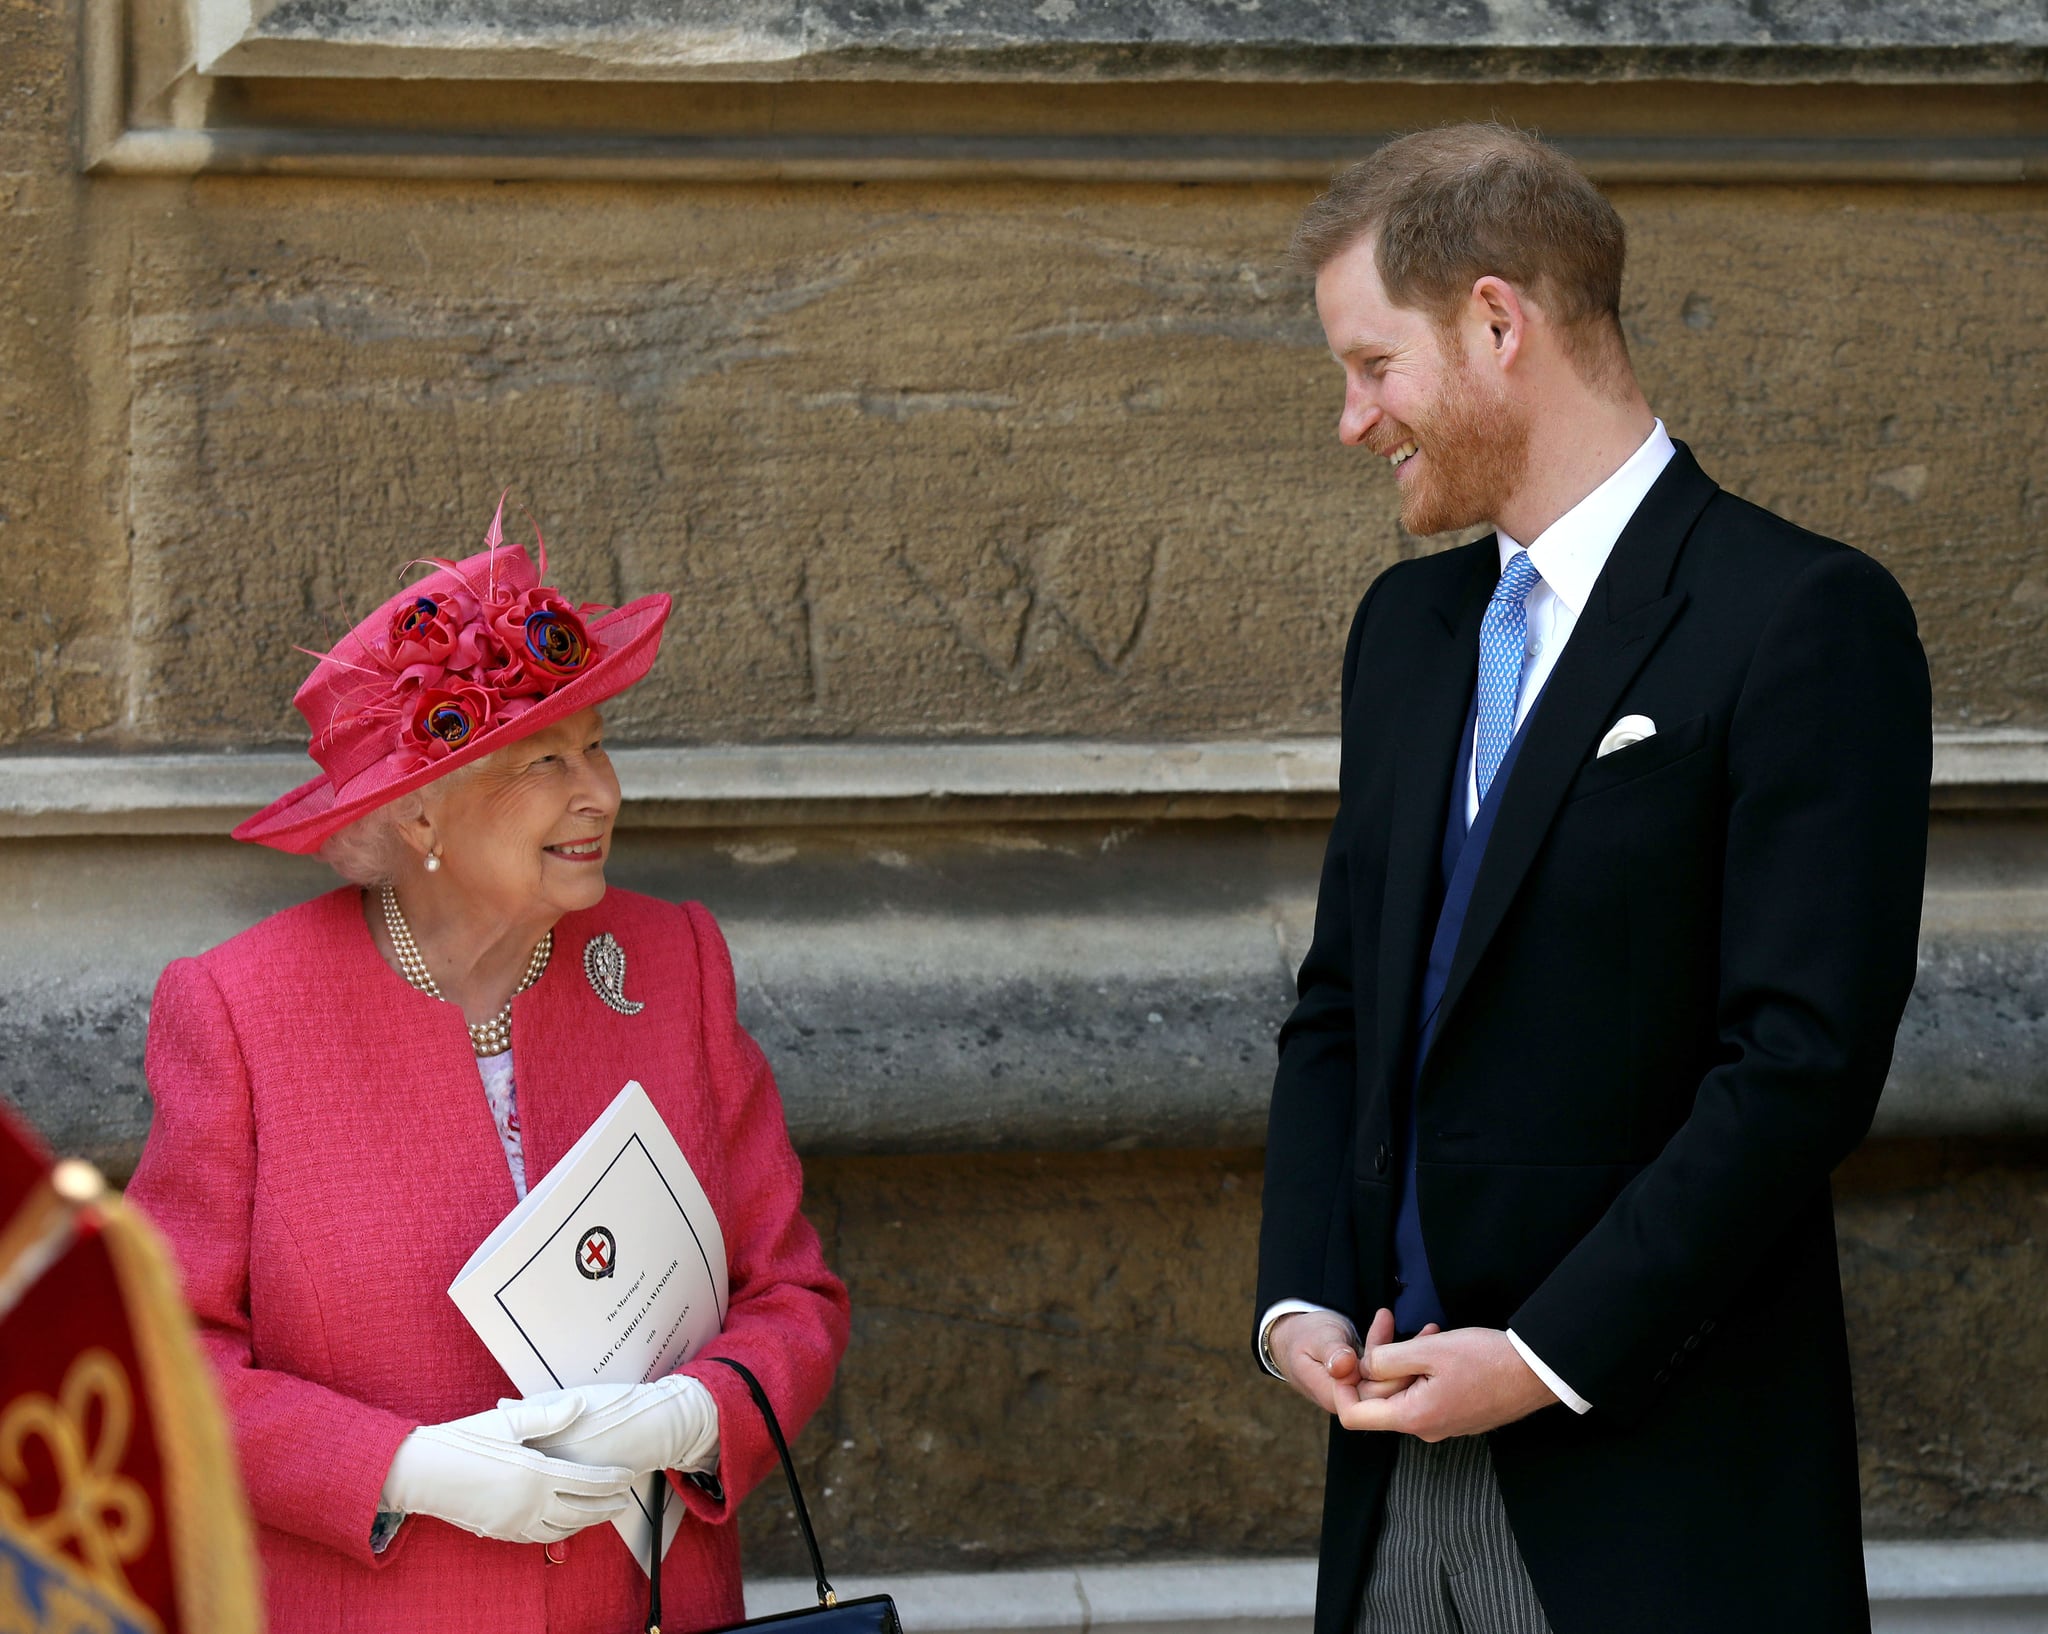 WINDSOR, ENGLAND - MAY 18: Queen Elizabeth II speaks with Prince Harry, Duke of Sussex as they leave after the wedding of Lady Gabriella Windsor to Thomas Kingston at St George's Chapel, Windsor Castle on May 18, 2019 in Windsor, England. (Photo by Steve Parsons - WPA Pool/Getty Images)